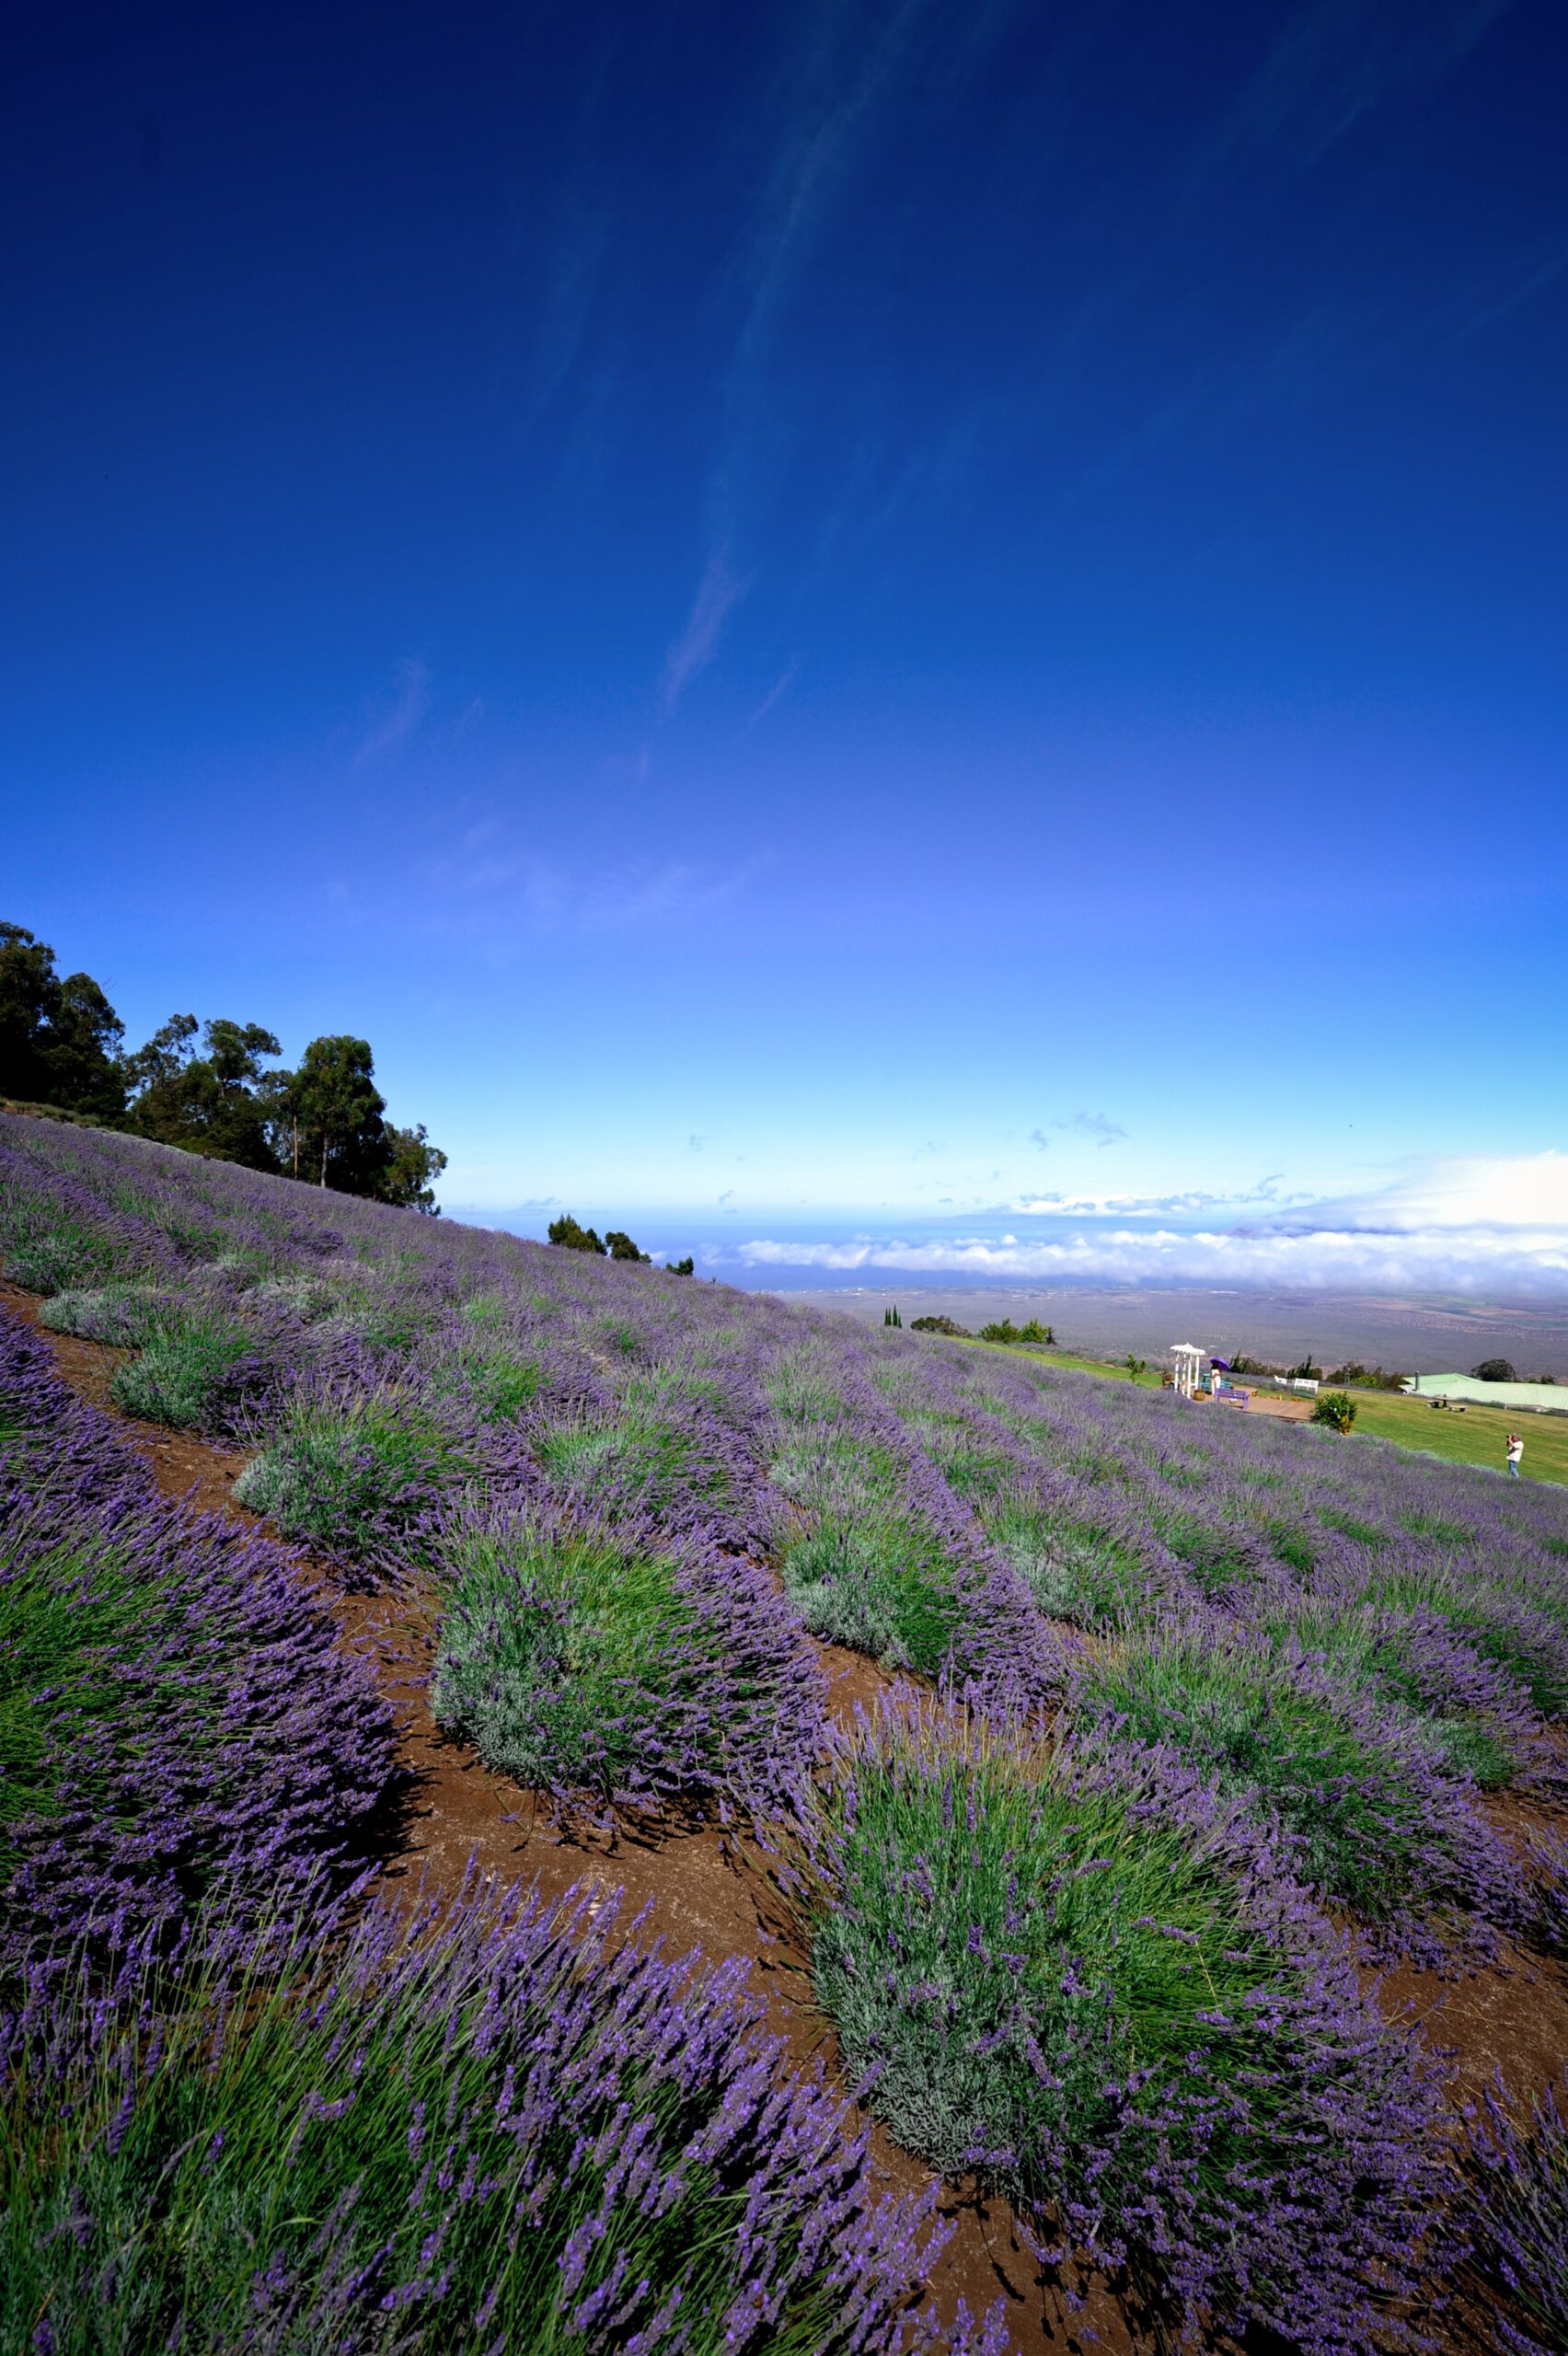 Fields of lavender overlooking the Pacific Ocean at Ali’i Kula Lavender Farm in Maui, Hawaii. (Photo: Courtesy of Ali’i Kula Lavender Farm)